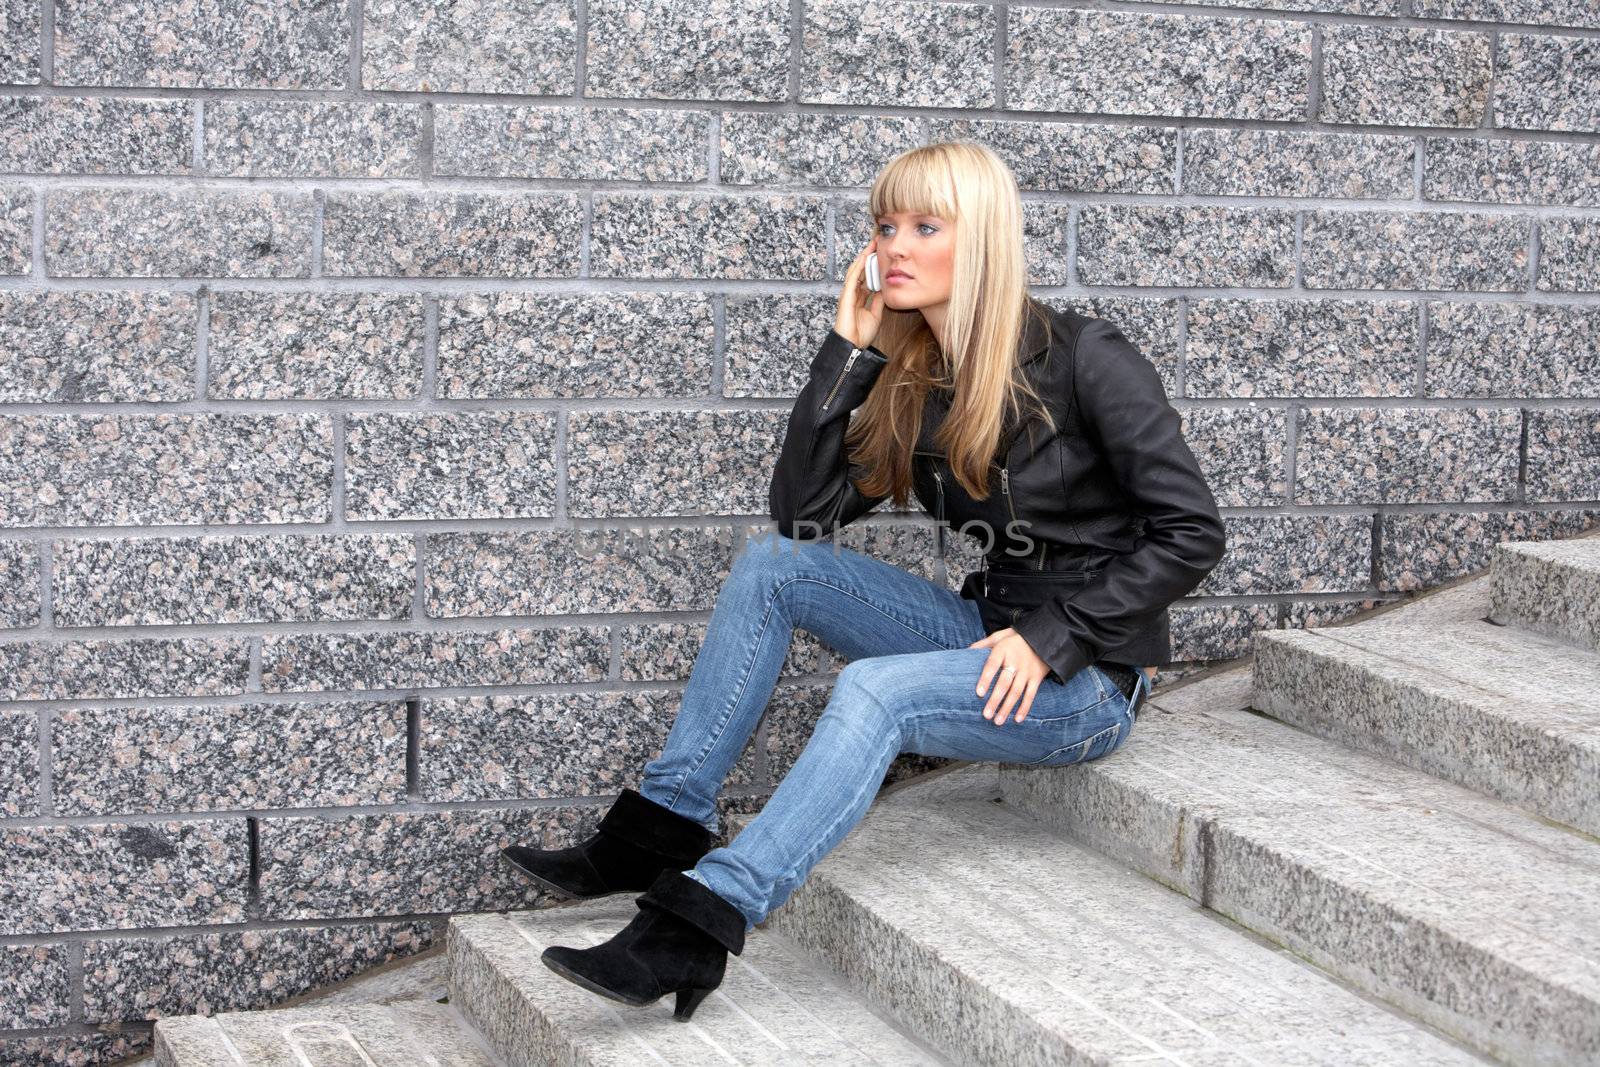 Young woman using mobile phone, sitting on stairway